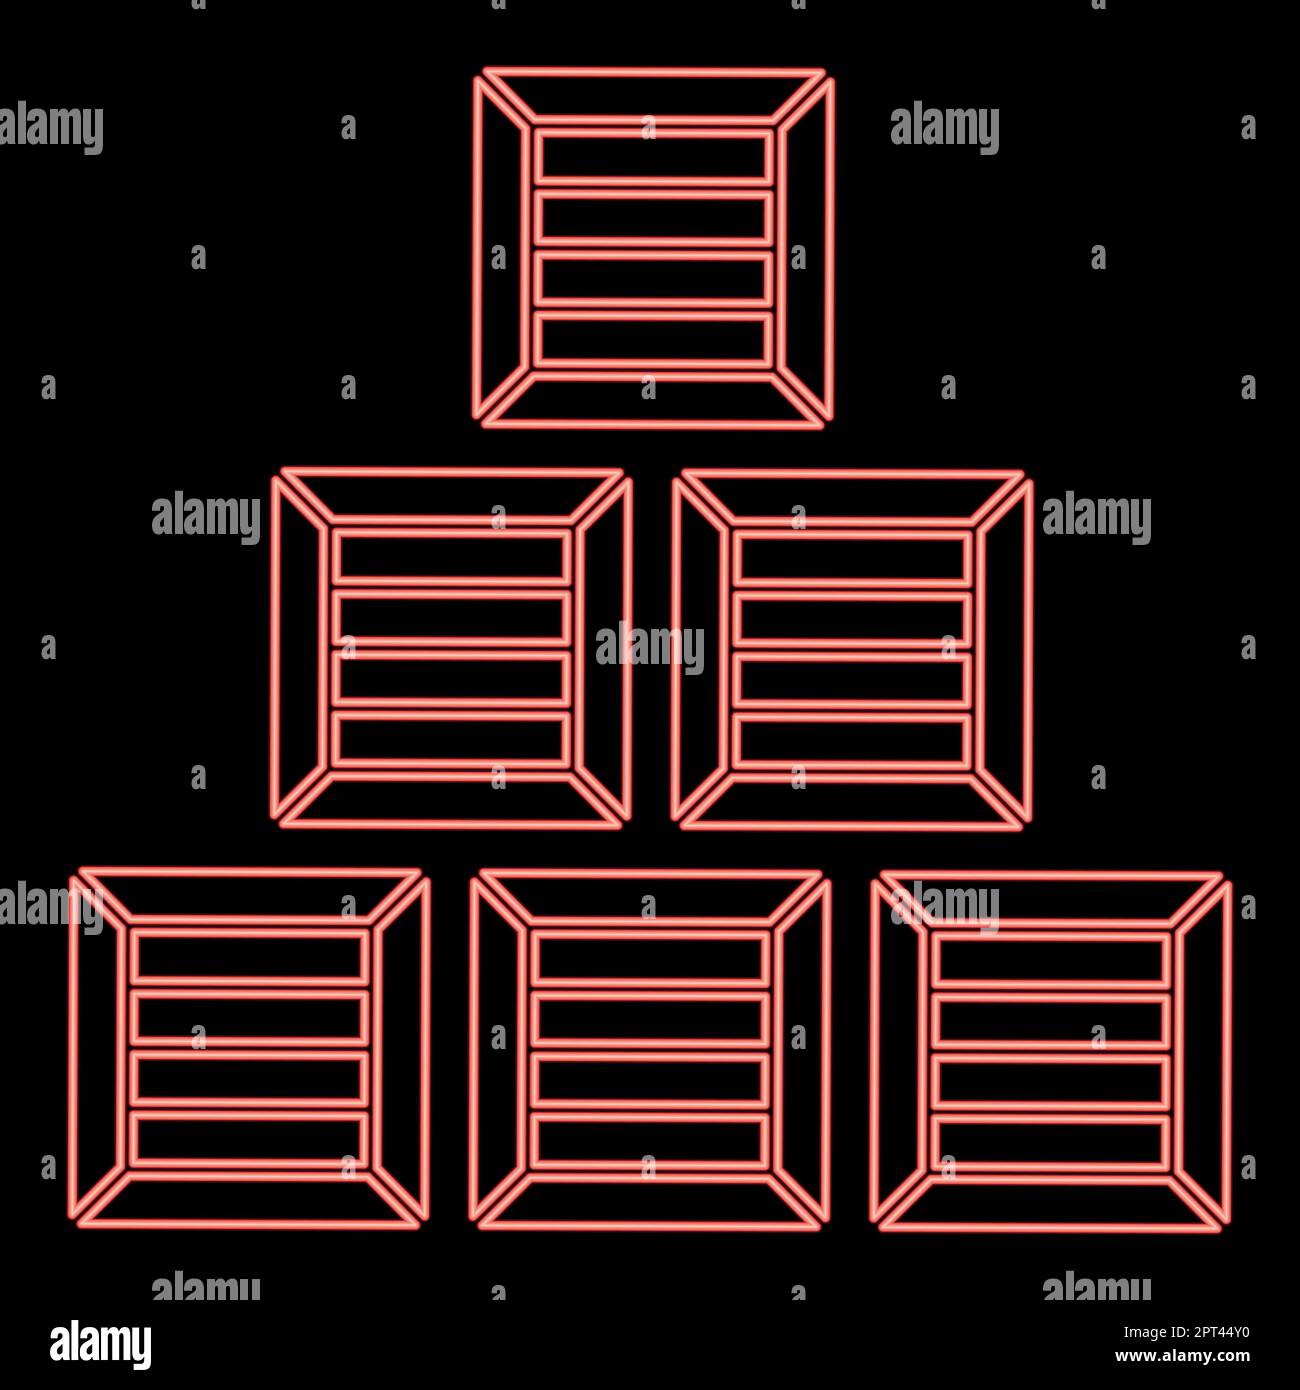 Neon pyramid crates Wooden boxs Containers red color vector illustration image flat style Stock Vector